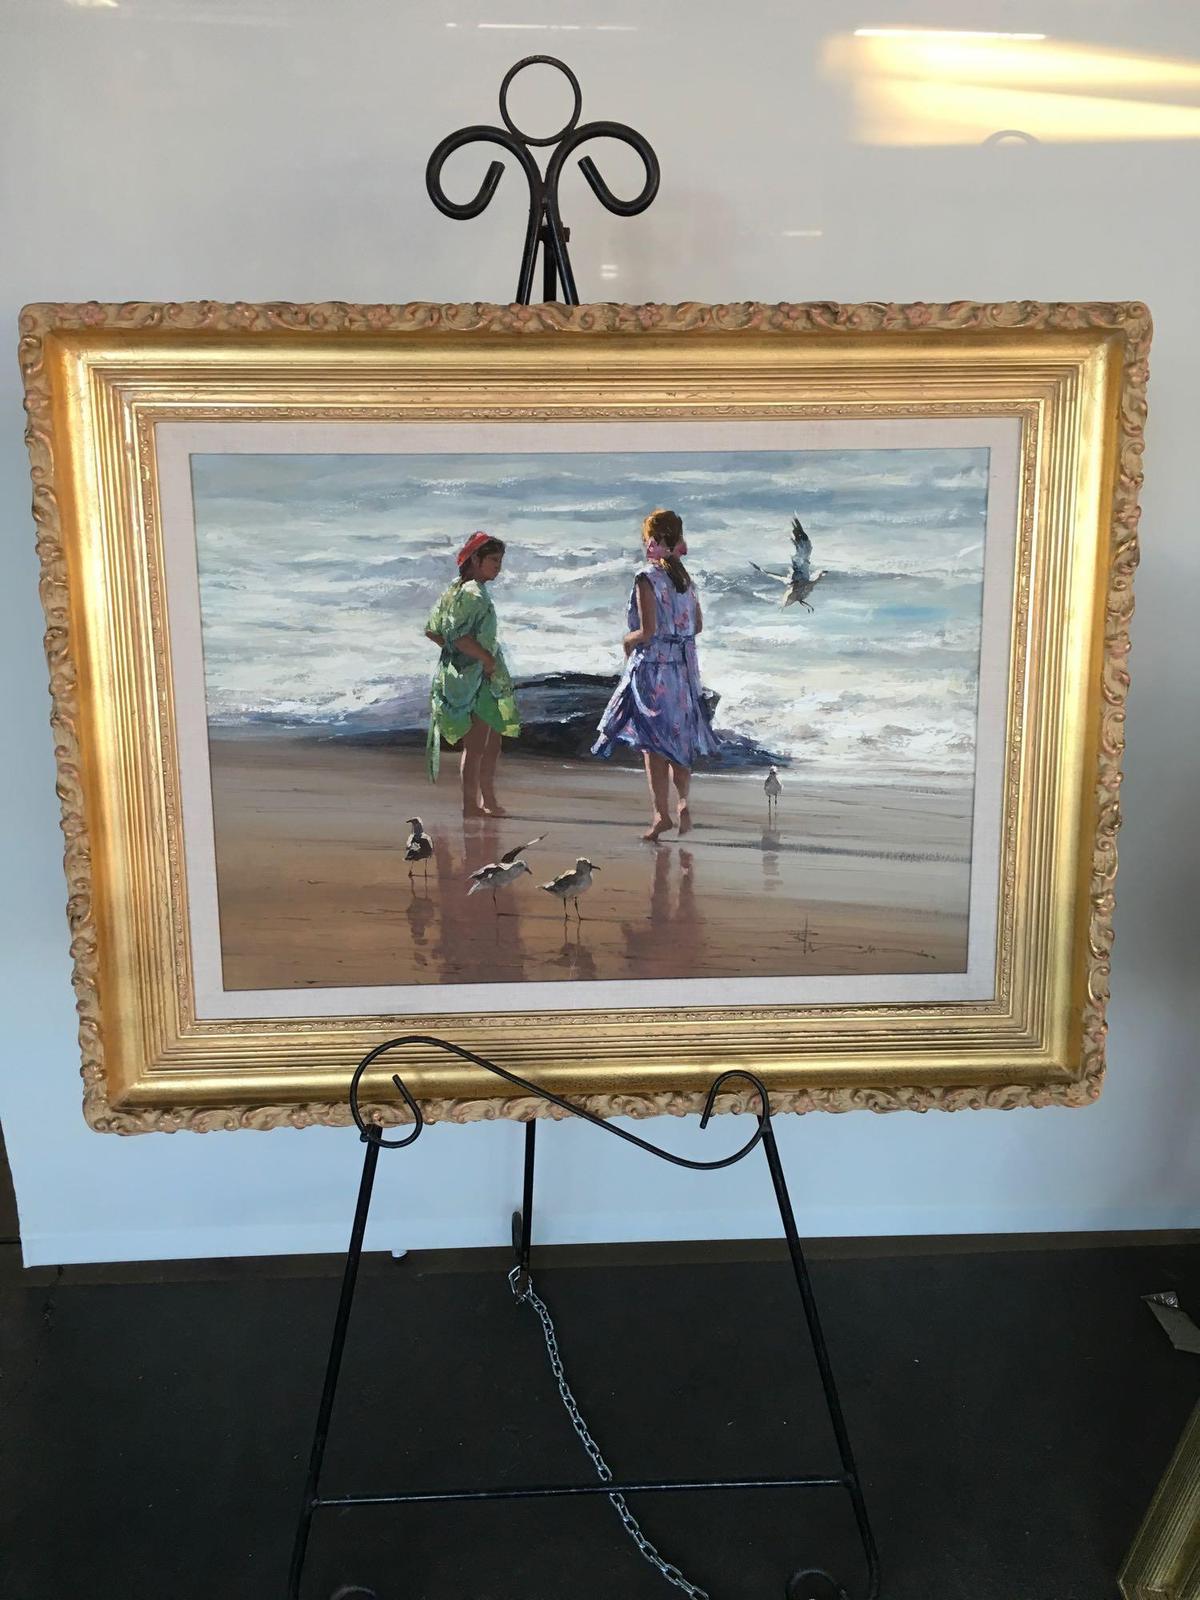 Sea Scape Oil on canvas, Sharing Time, by R. Hagen Value $3,100